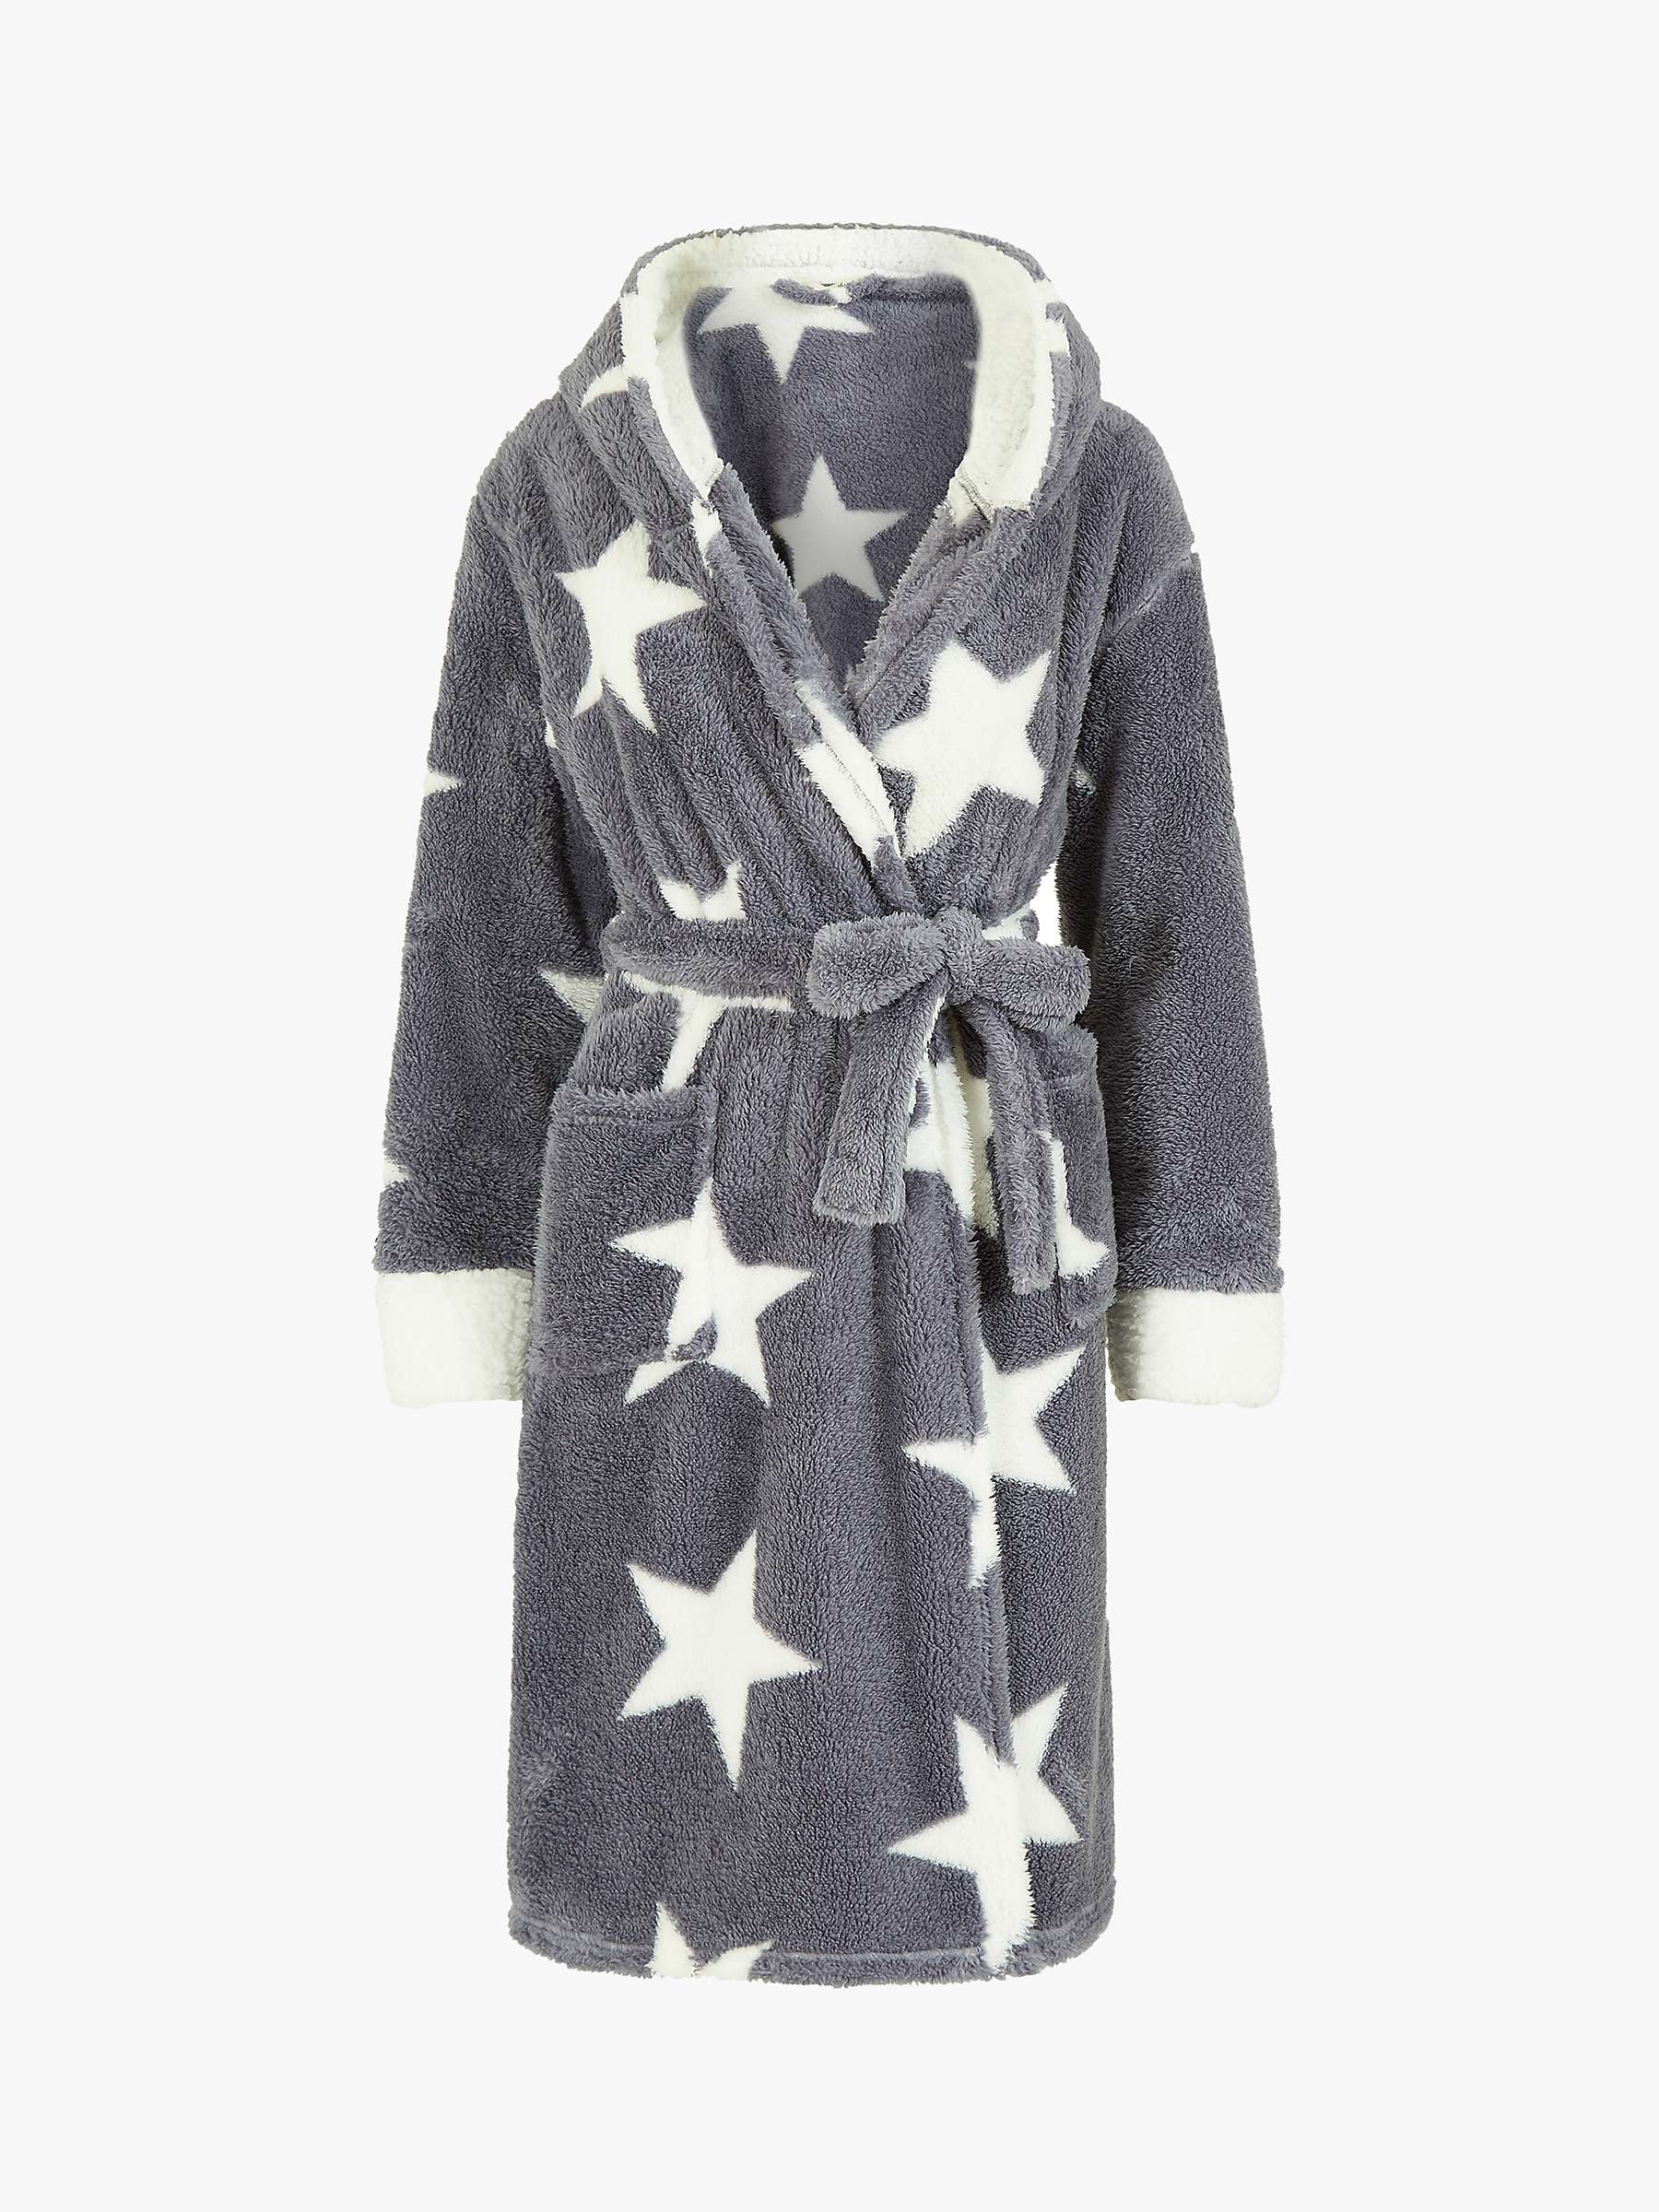 Buy Yumi Super Soft Star Print Dressing Gown Online at johnlewis.com